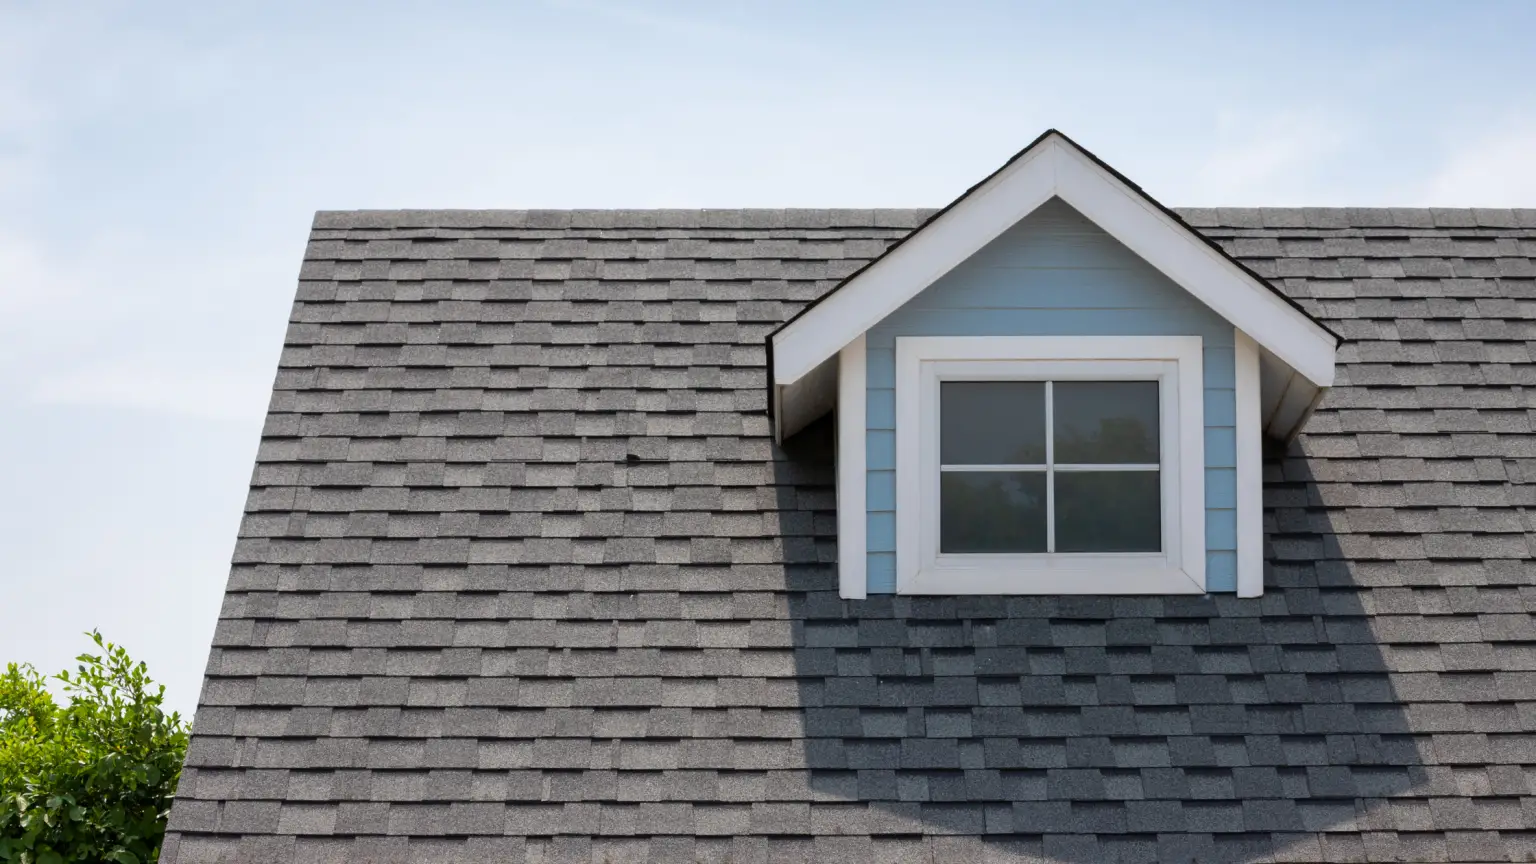 How Much Does a New Roof Cost in 2021?